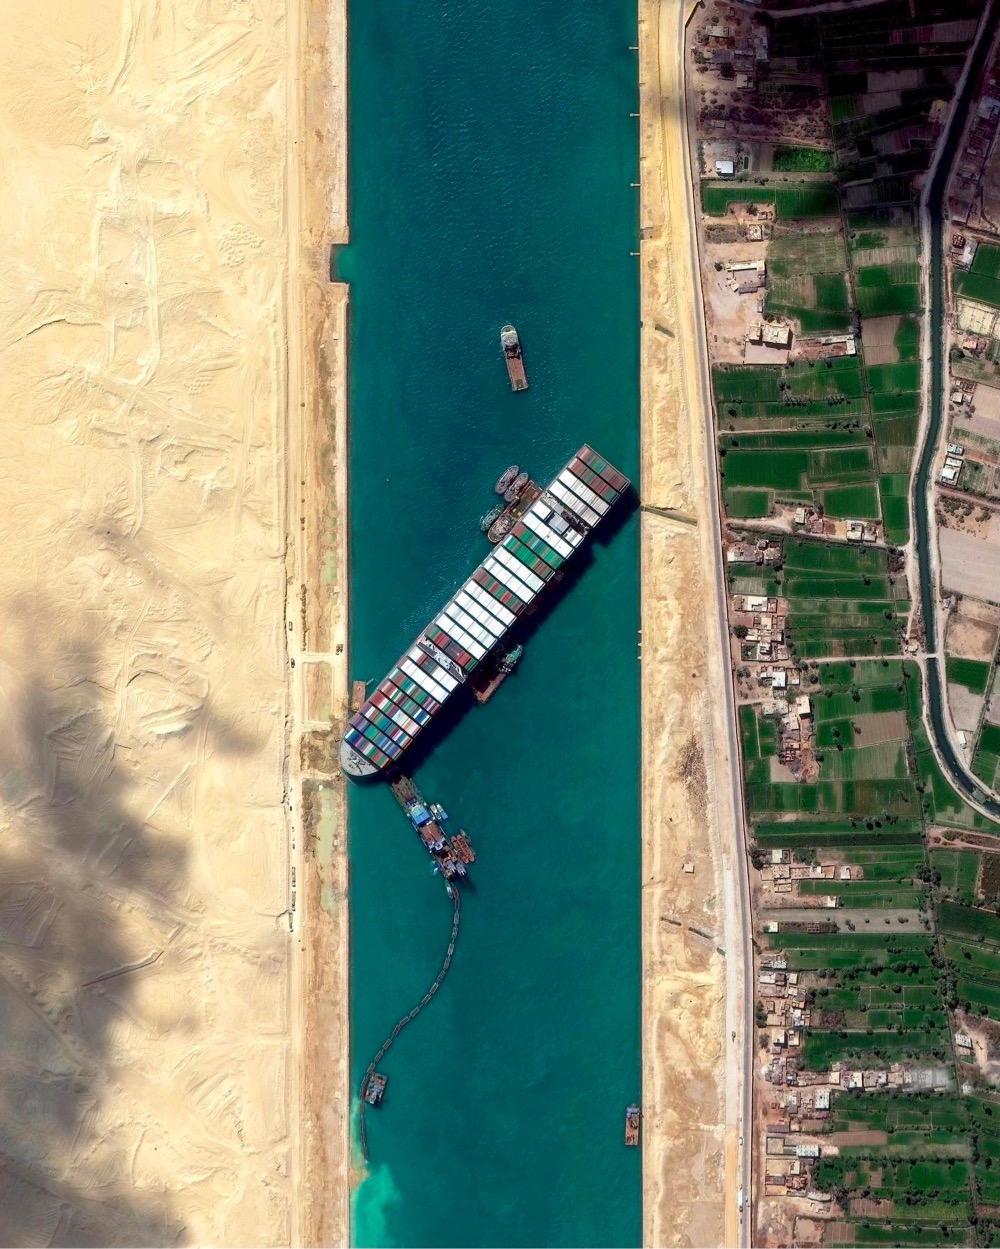 a ship called the Ever Given is stuck in the Suez Canal